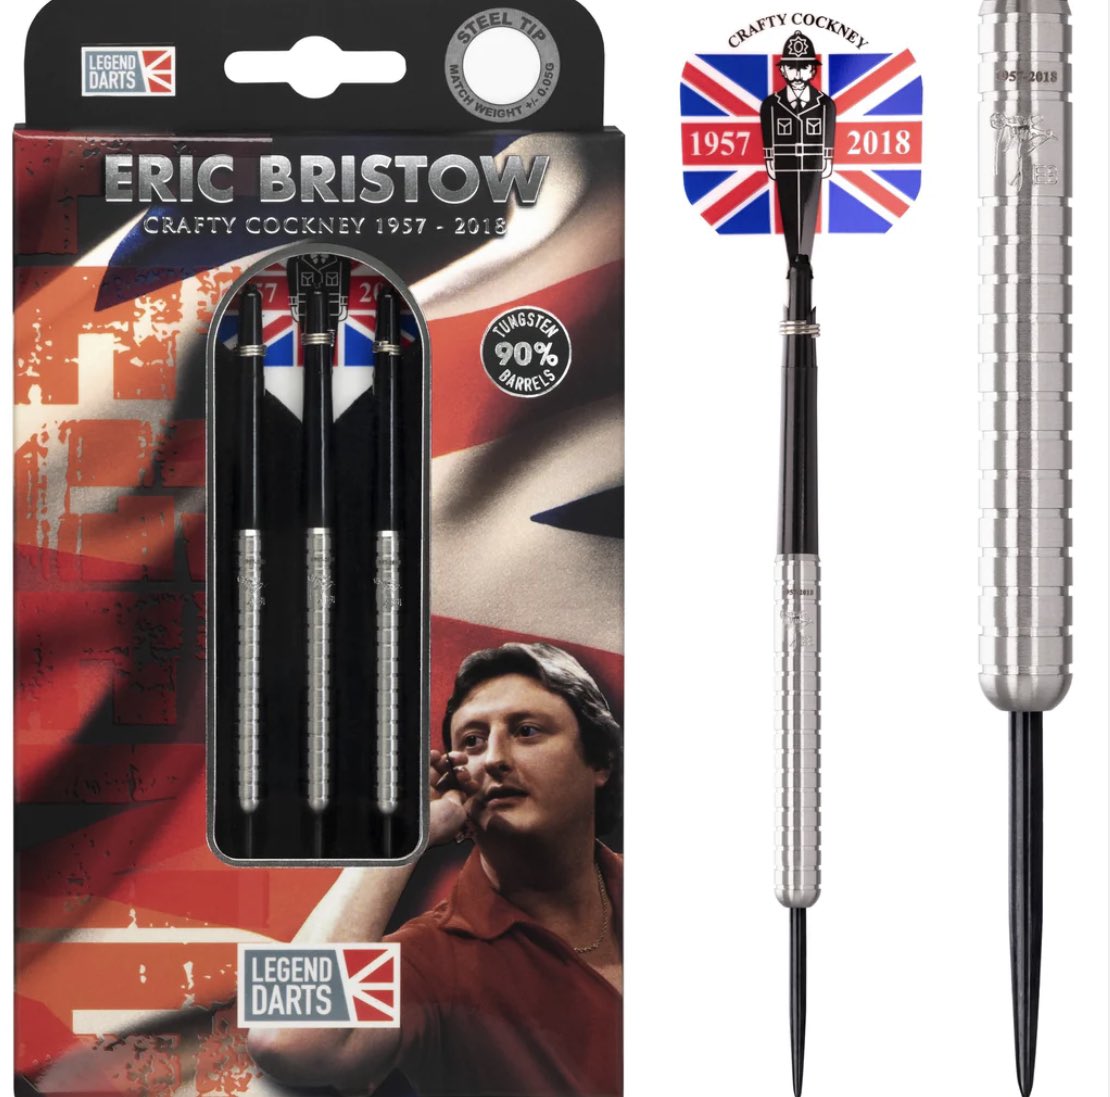 The original legend of darts - 5x Champion of the World🎯 The Eric Bristow range is available here ➡ bit.ly/EricBristow Check out all Legend Darts products including our Wayne Mardle, Lisa Ashton and other pro player ranges at legenddarts.com